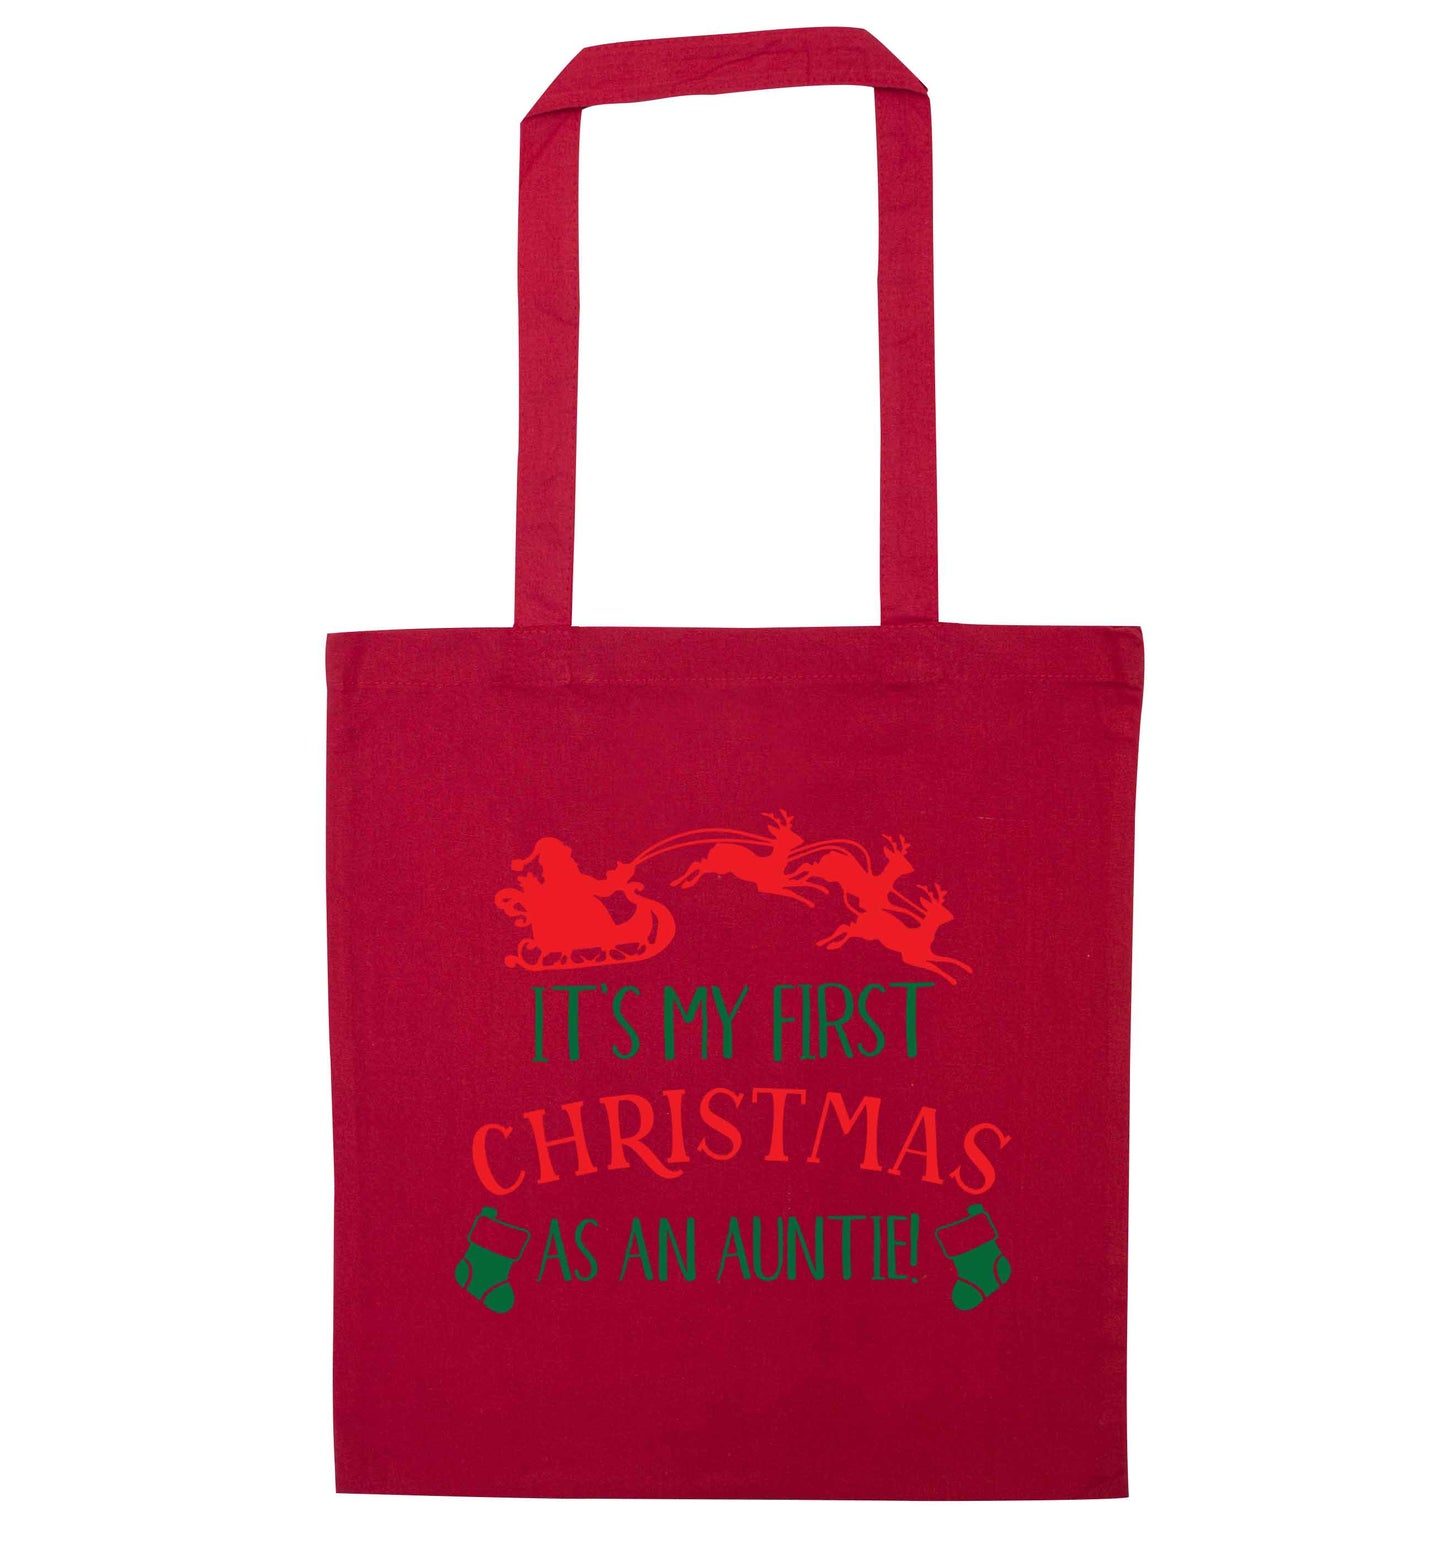 It's my first Christmas as an auntie! red tote bag